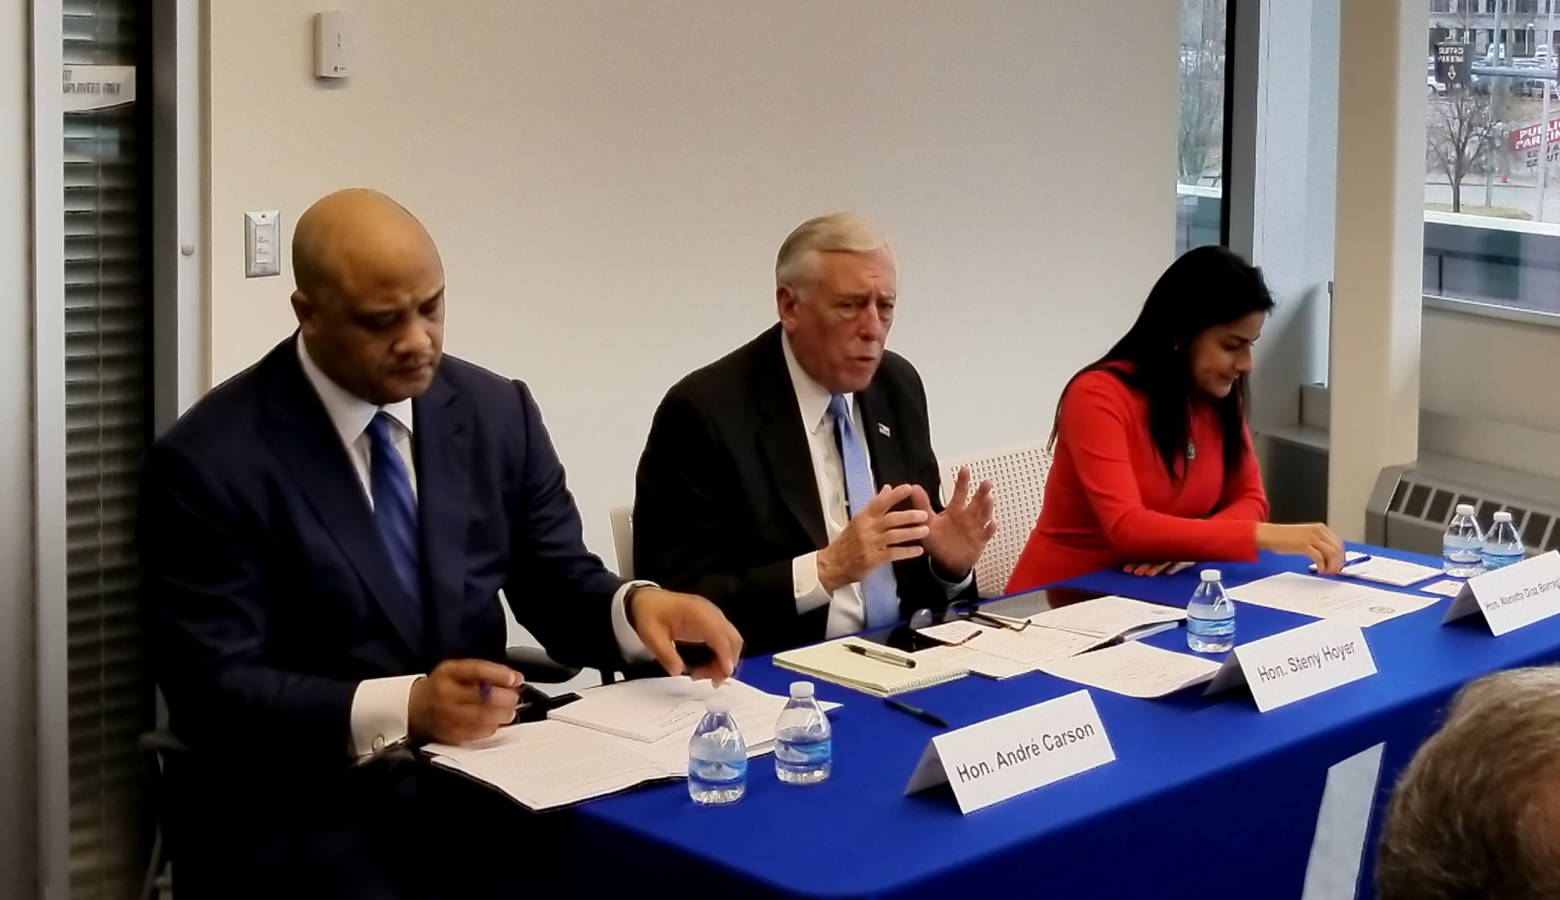 Reps. Andre Carson (D-Ind.), Steny Hoyer (D-Md.) and Rep. Nanette Barragán (D-Calif.) stop in Indianapolis on their "Make It In America Tour." (Samantha Horton/IPB News)